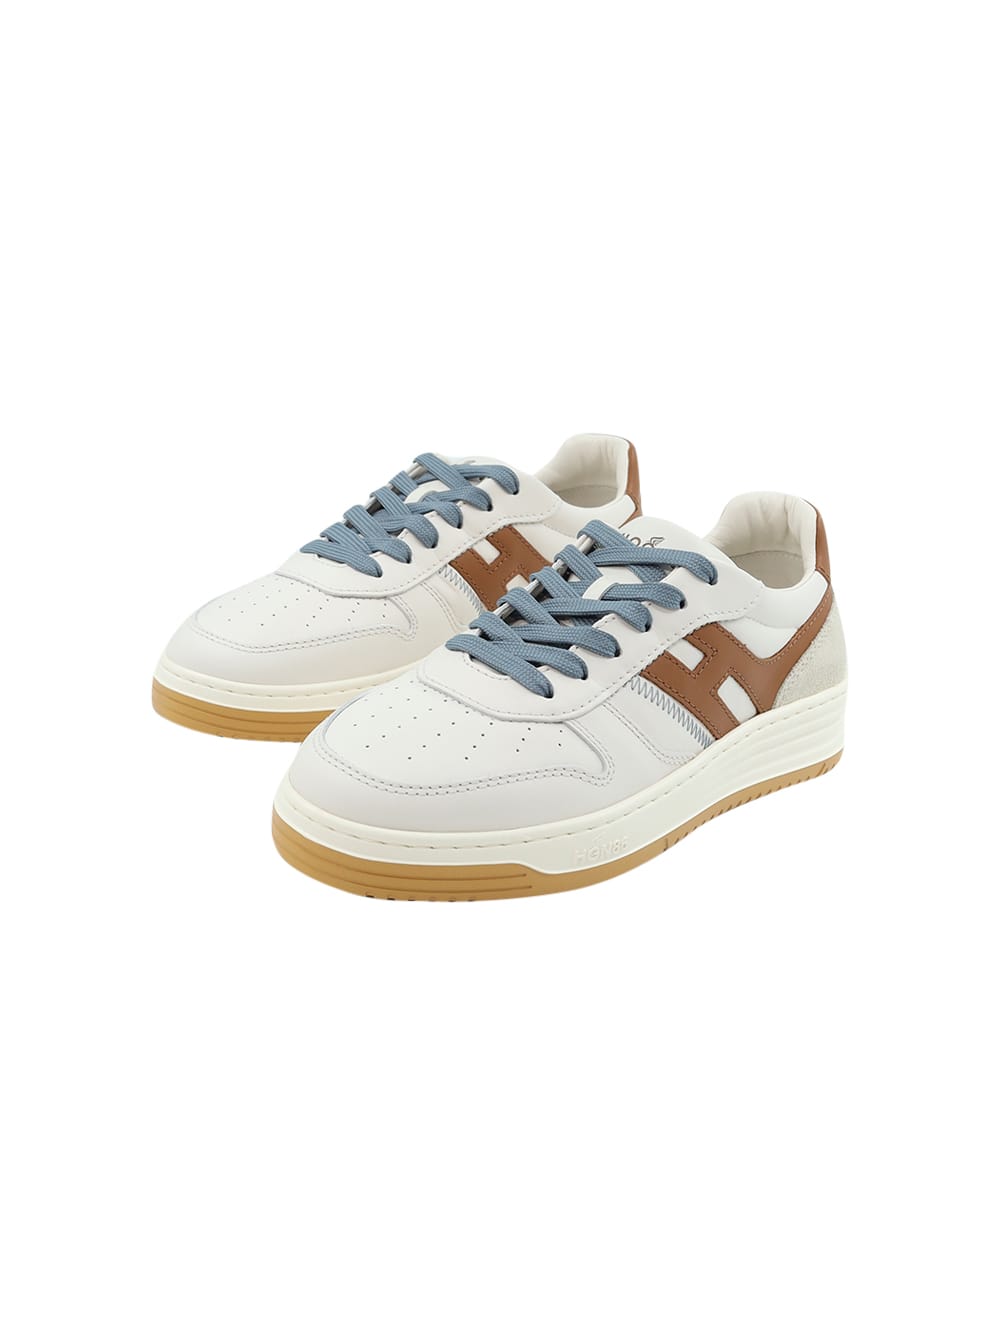 Hogan Trainers  H630 In Ivory